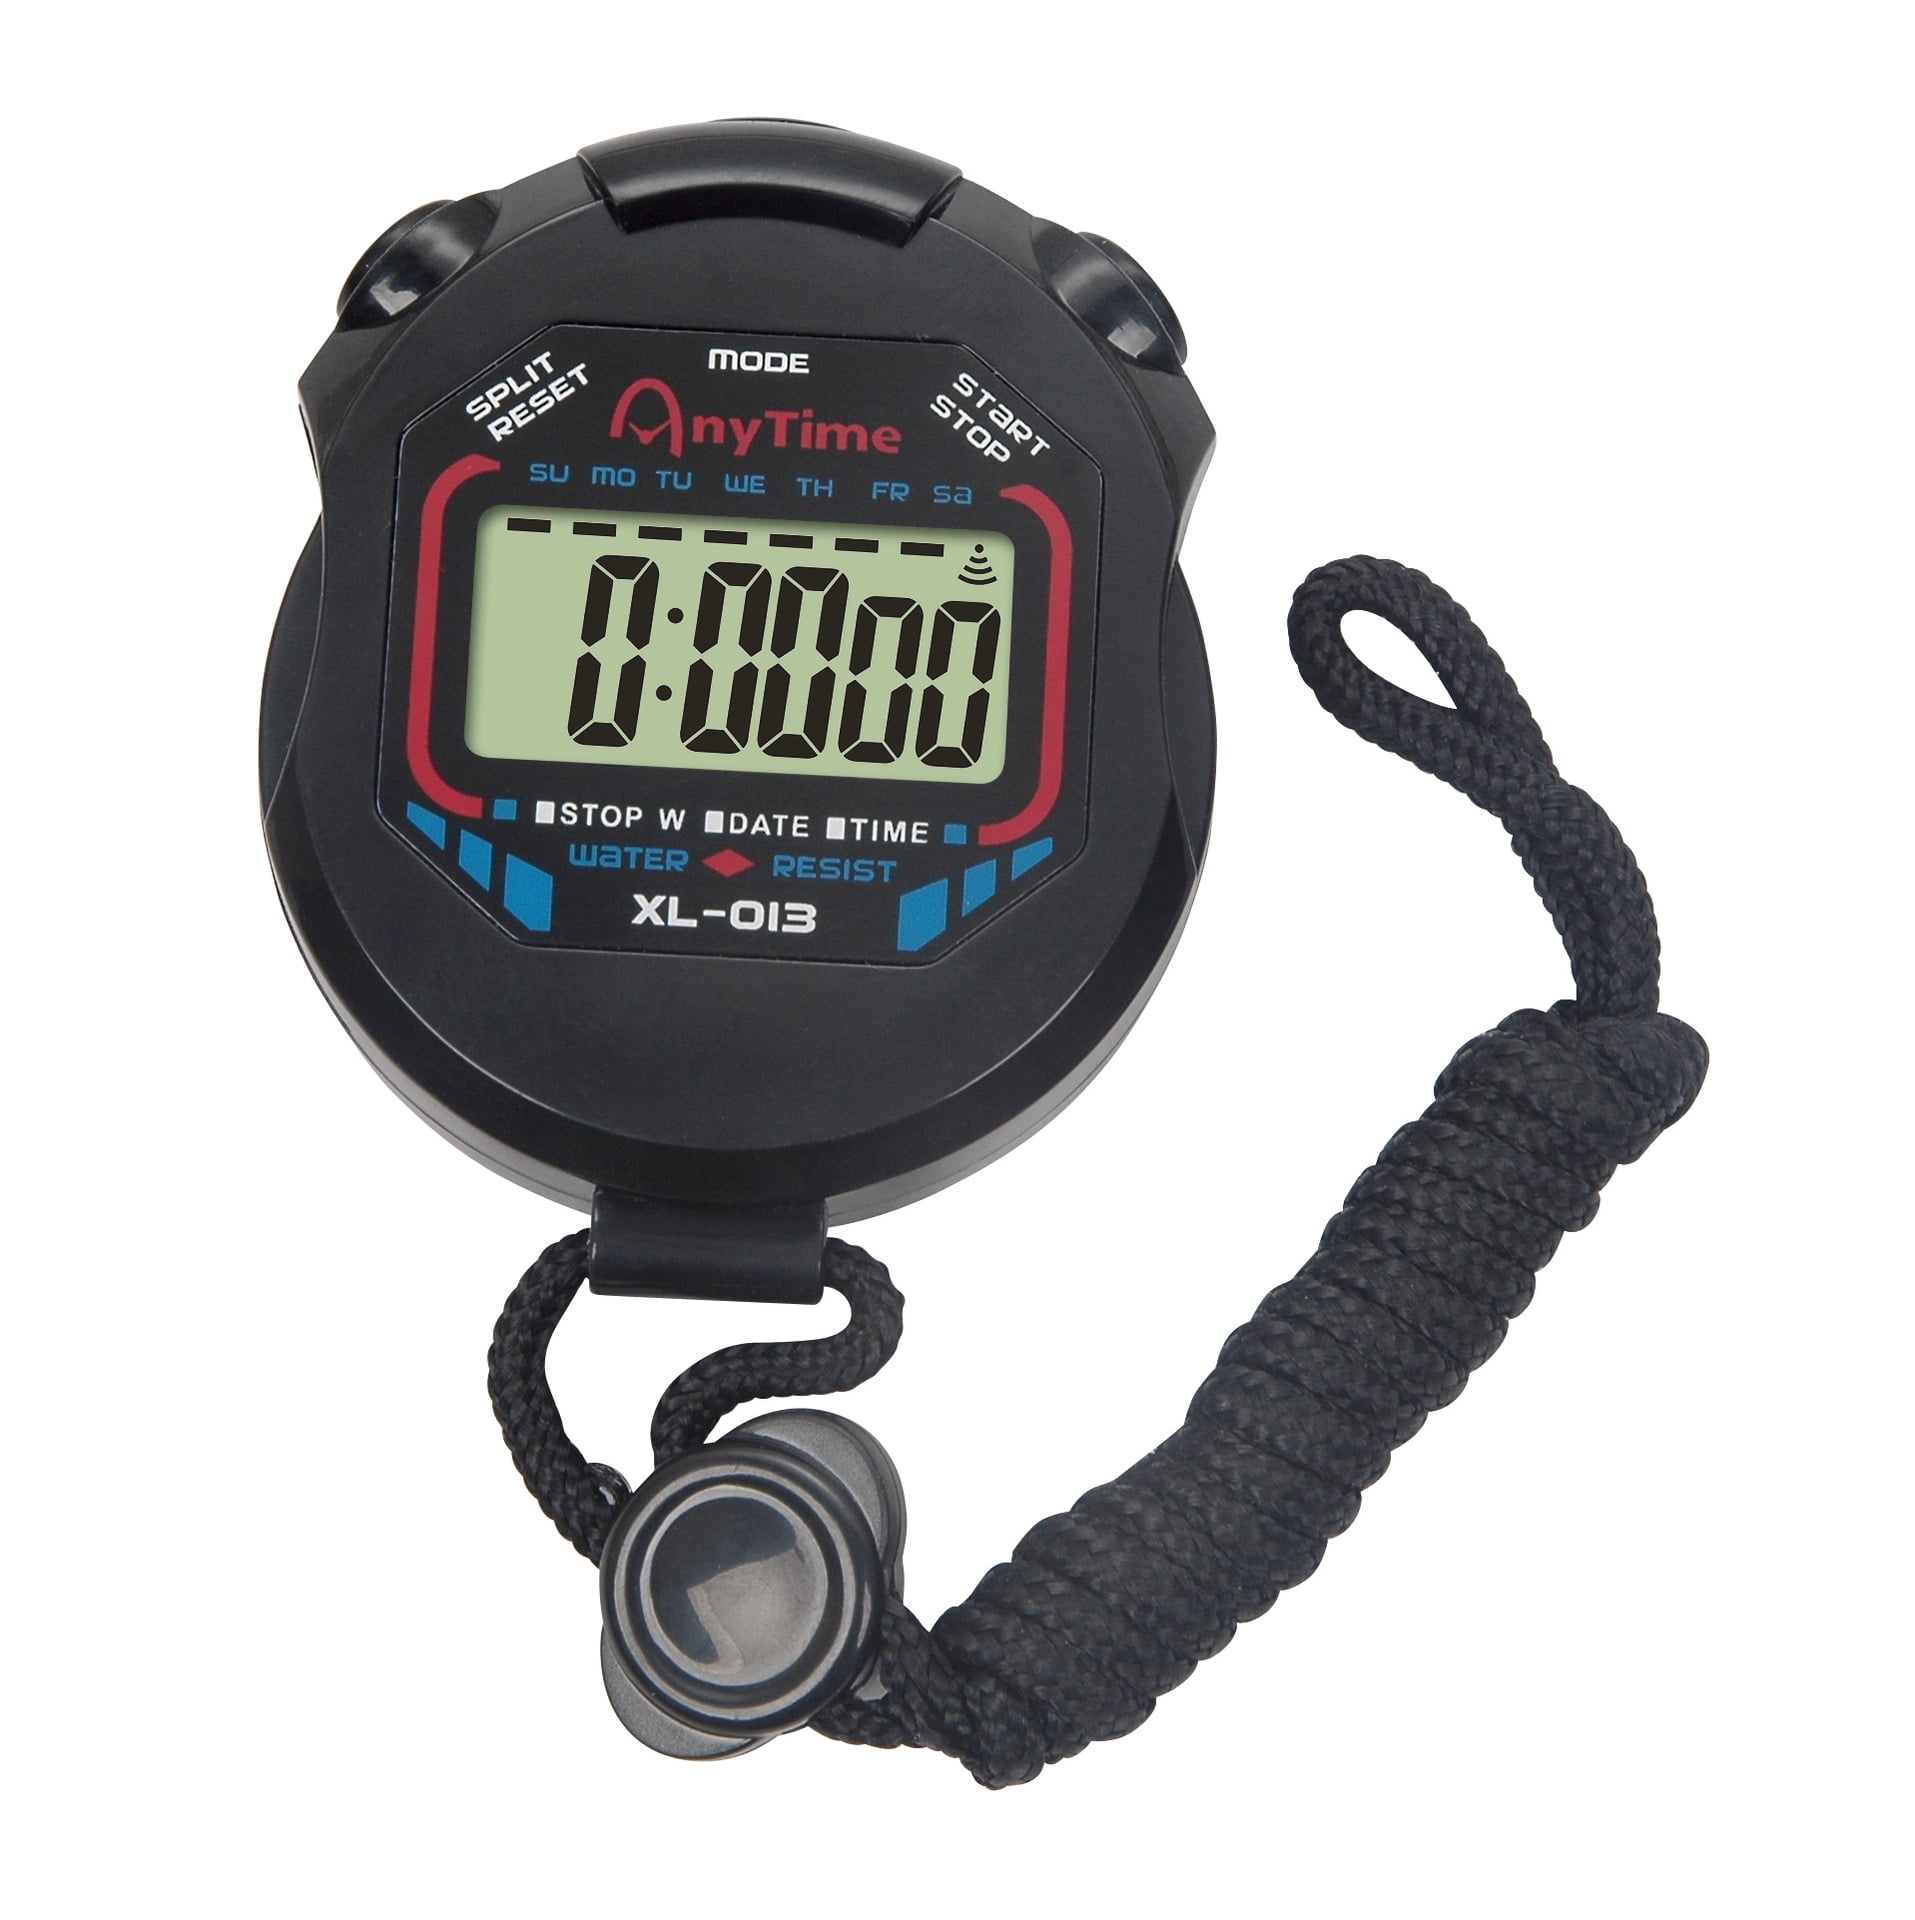 Large Digital LED Timers Totalisers Up Down Repeat TAKT Stop Watch